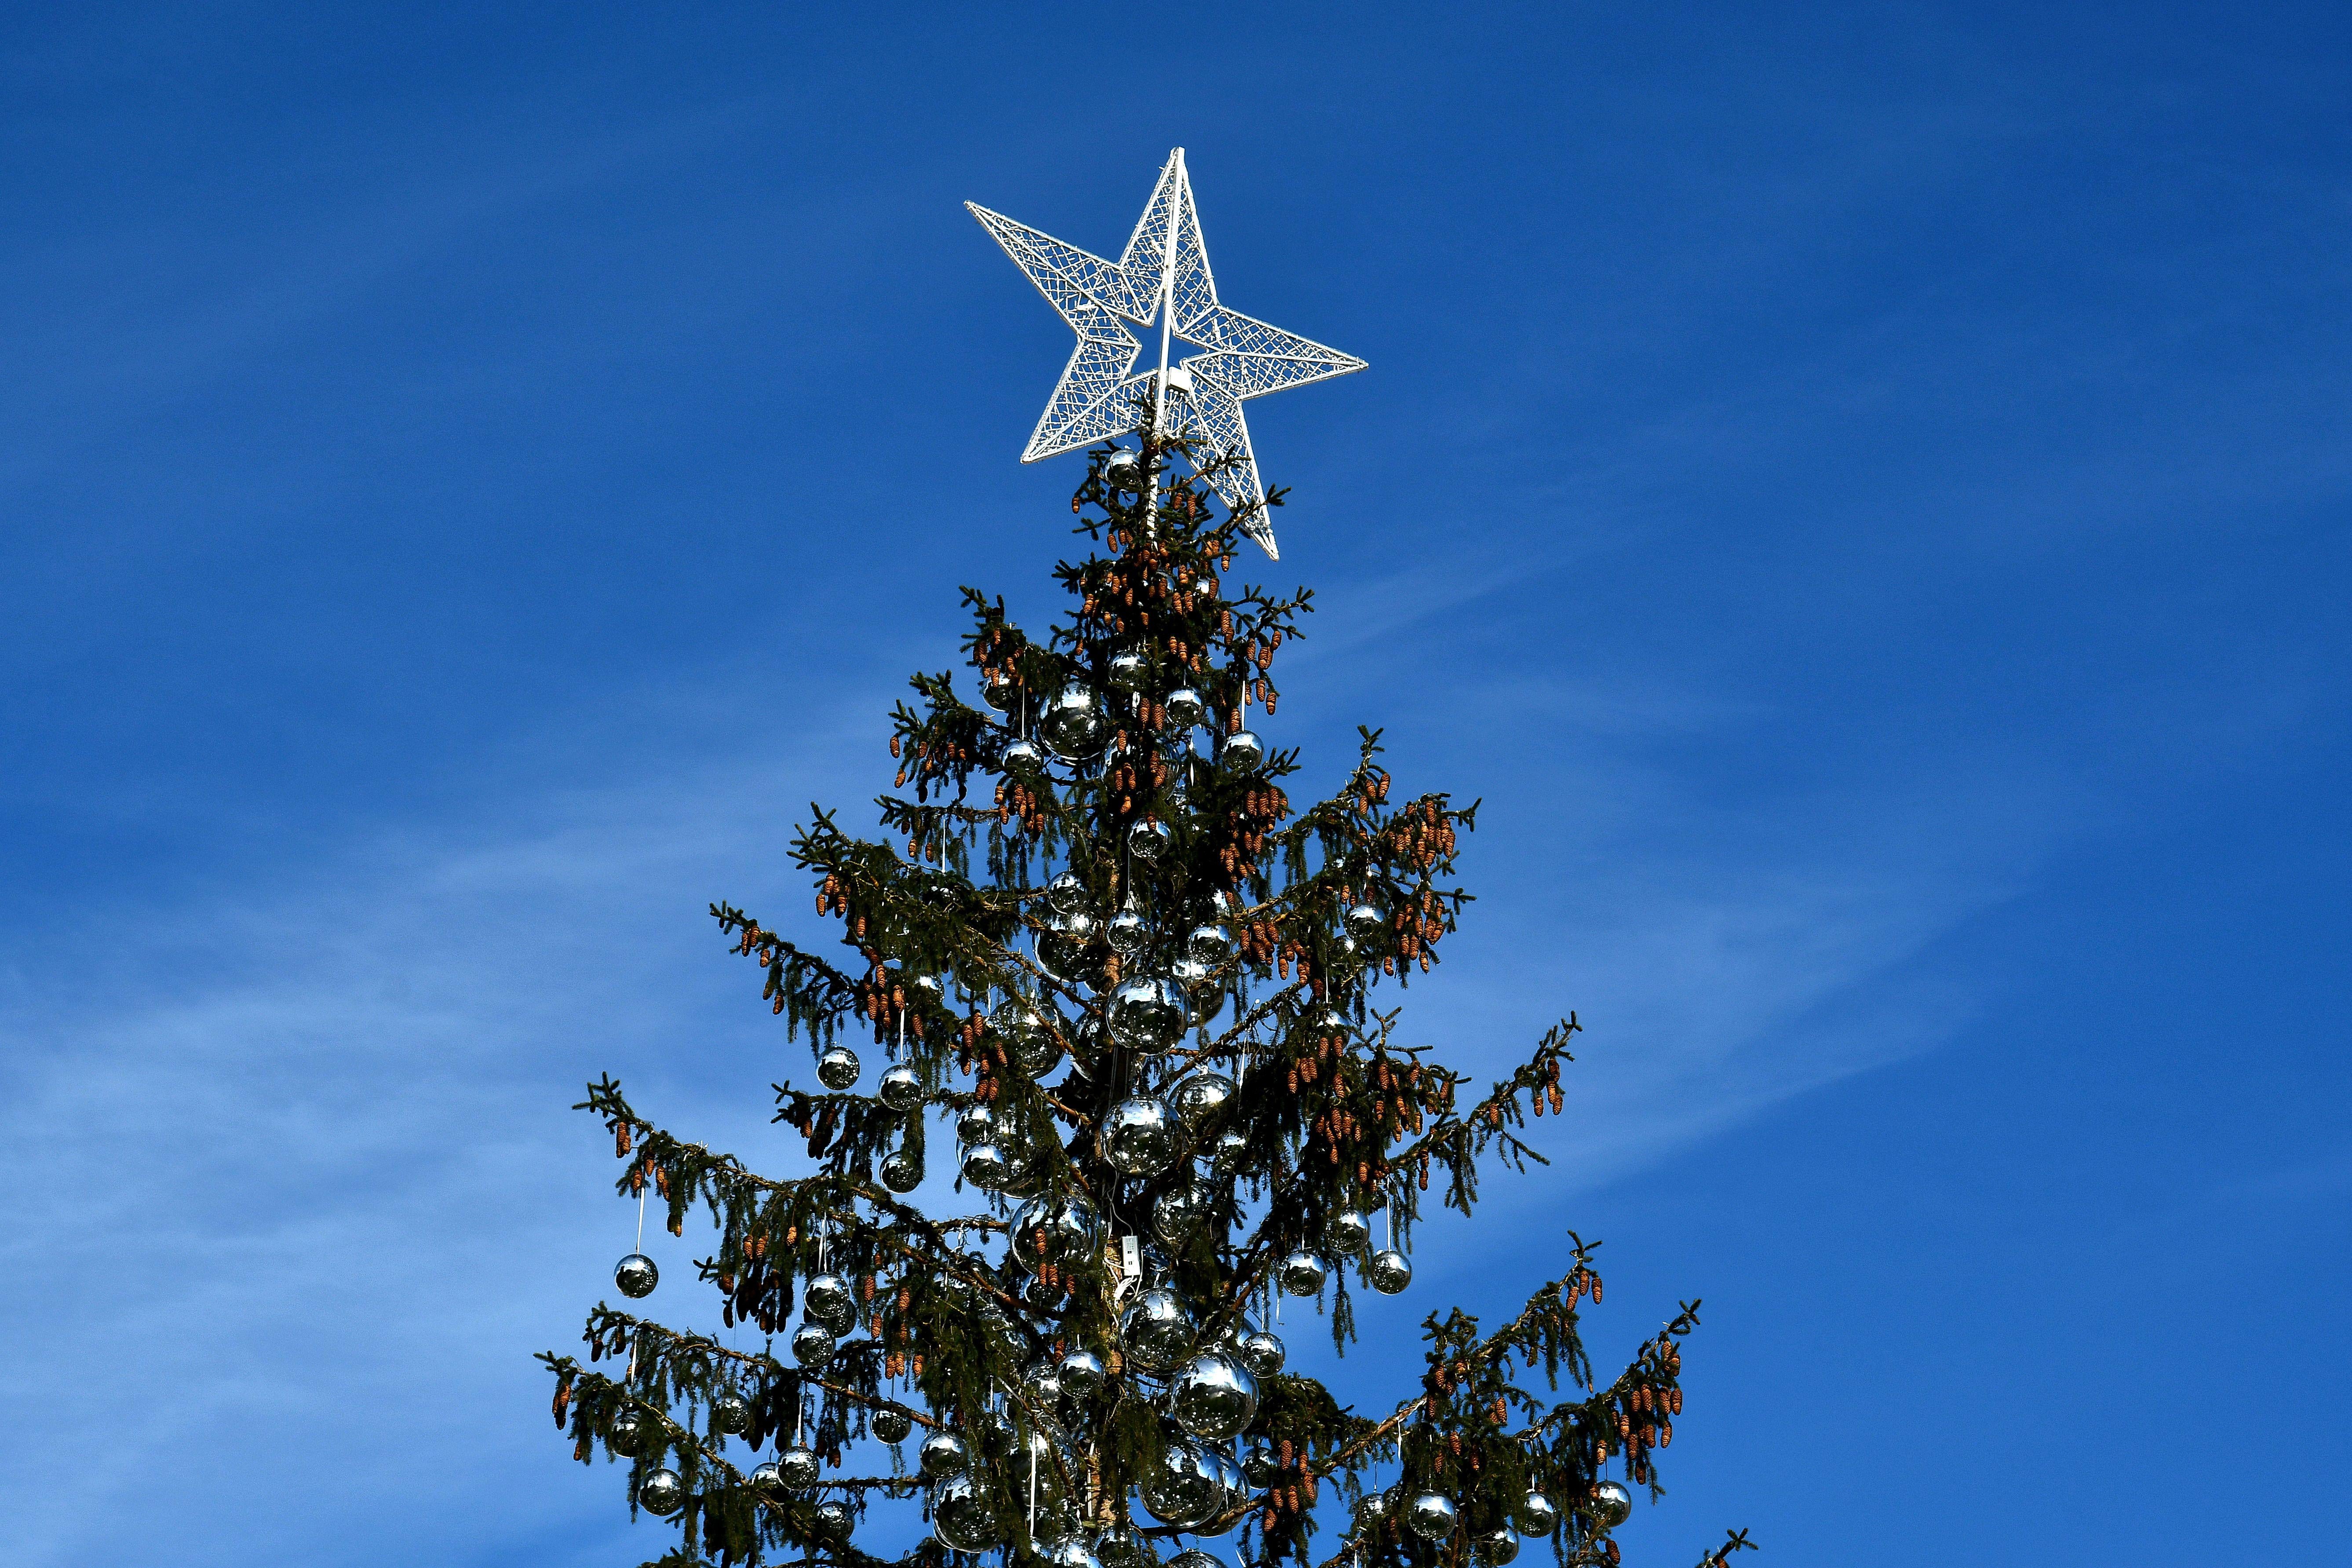 A picture shows the controversial Christmas tree at Piazza Venezia in Rome, on December 19, 2017. For the second year in a row the Christmas tree has backfired on the city's mayor Virginia Raggi of the anti-establishment Five Star mouvement (M5S). This year the tree was a gift from Val di Fiemme in the Trentino region of northern Italy but unfortunetly the municipality admited the tree has dried before Christmas day. / AFP PHOTO / Alberto PIZZOLI        (Photo credit should read ALBERTO PIZZOLI/AFP/Getty Images)